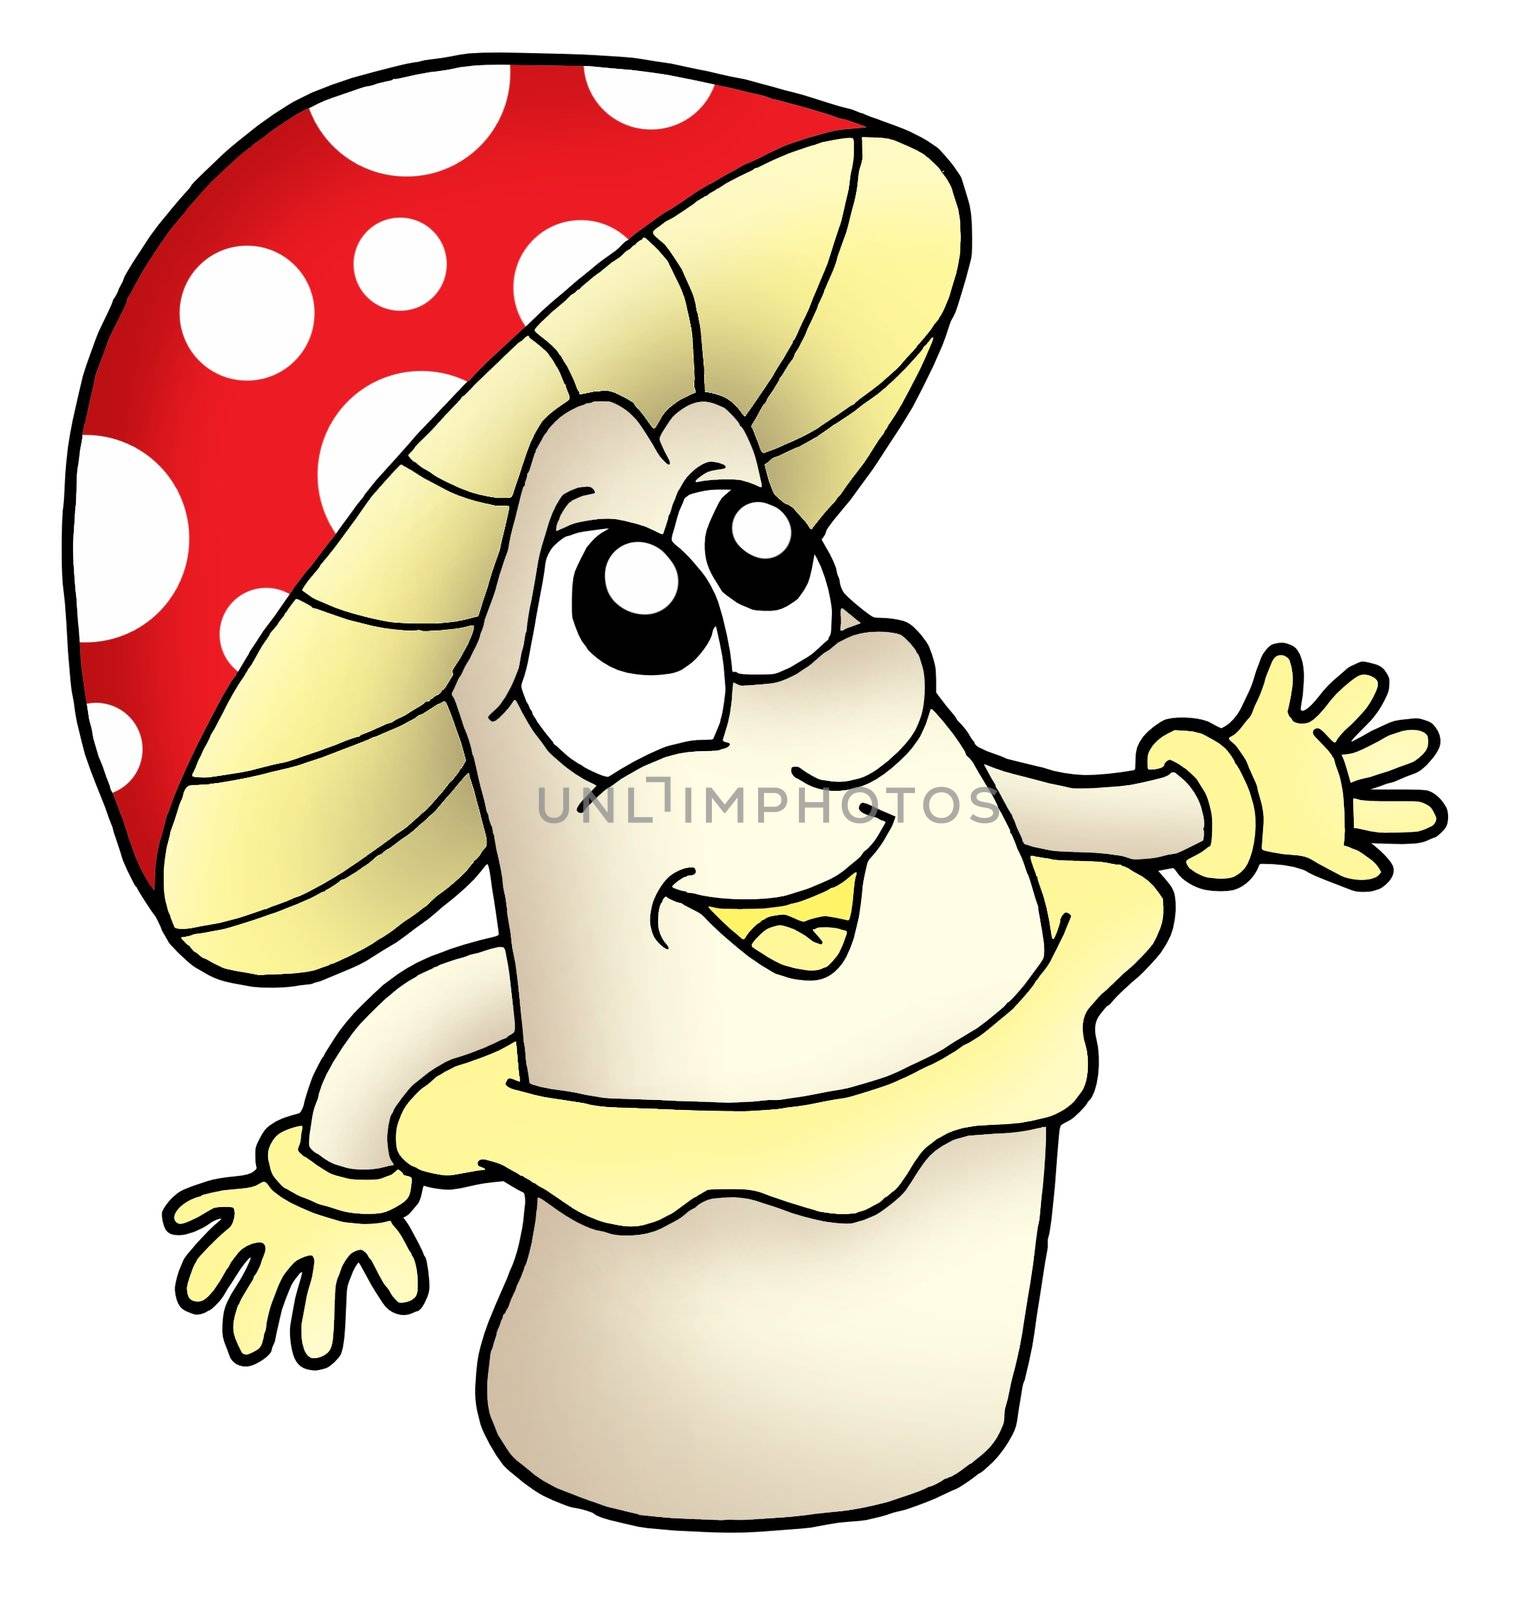 Yellow toadstool with red dotted cylinder - color illustration.